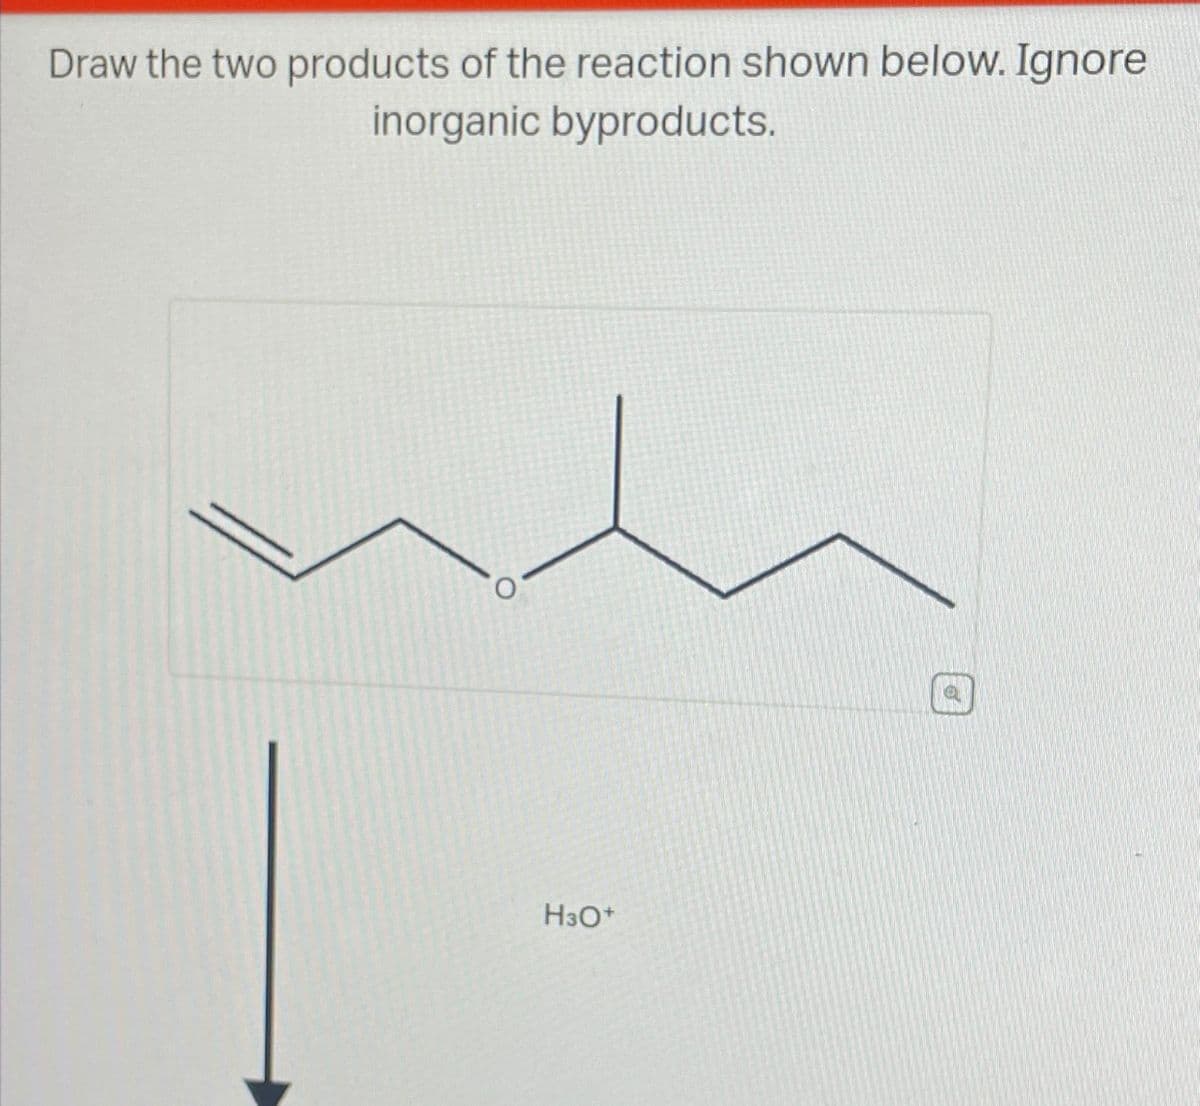 Draw the two products of the reaction shown below. Ignore
inorganic byproducts.
H3O+
o